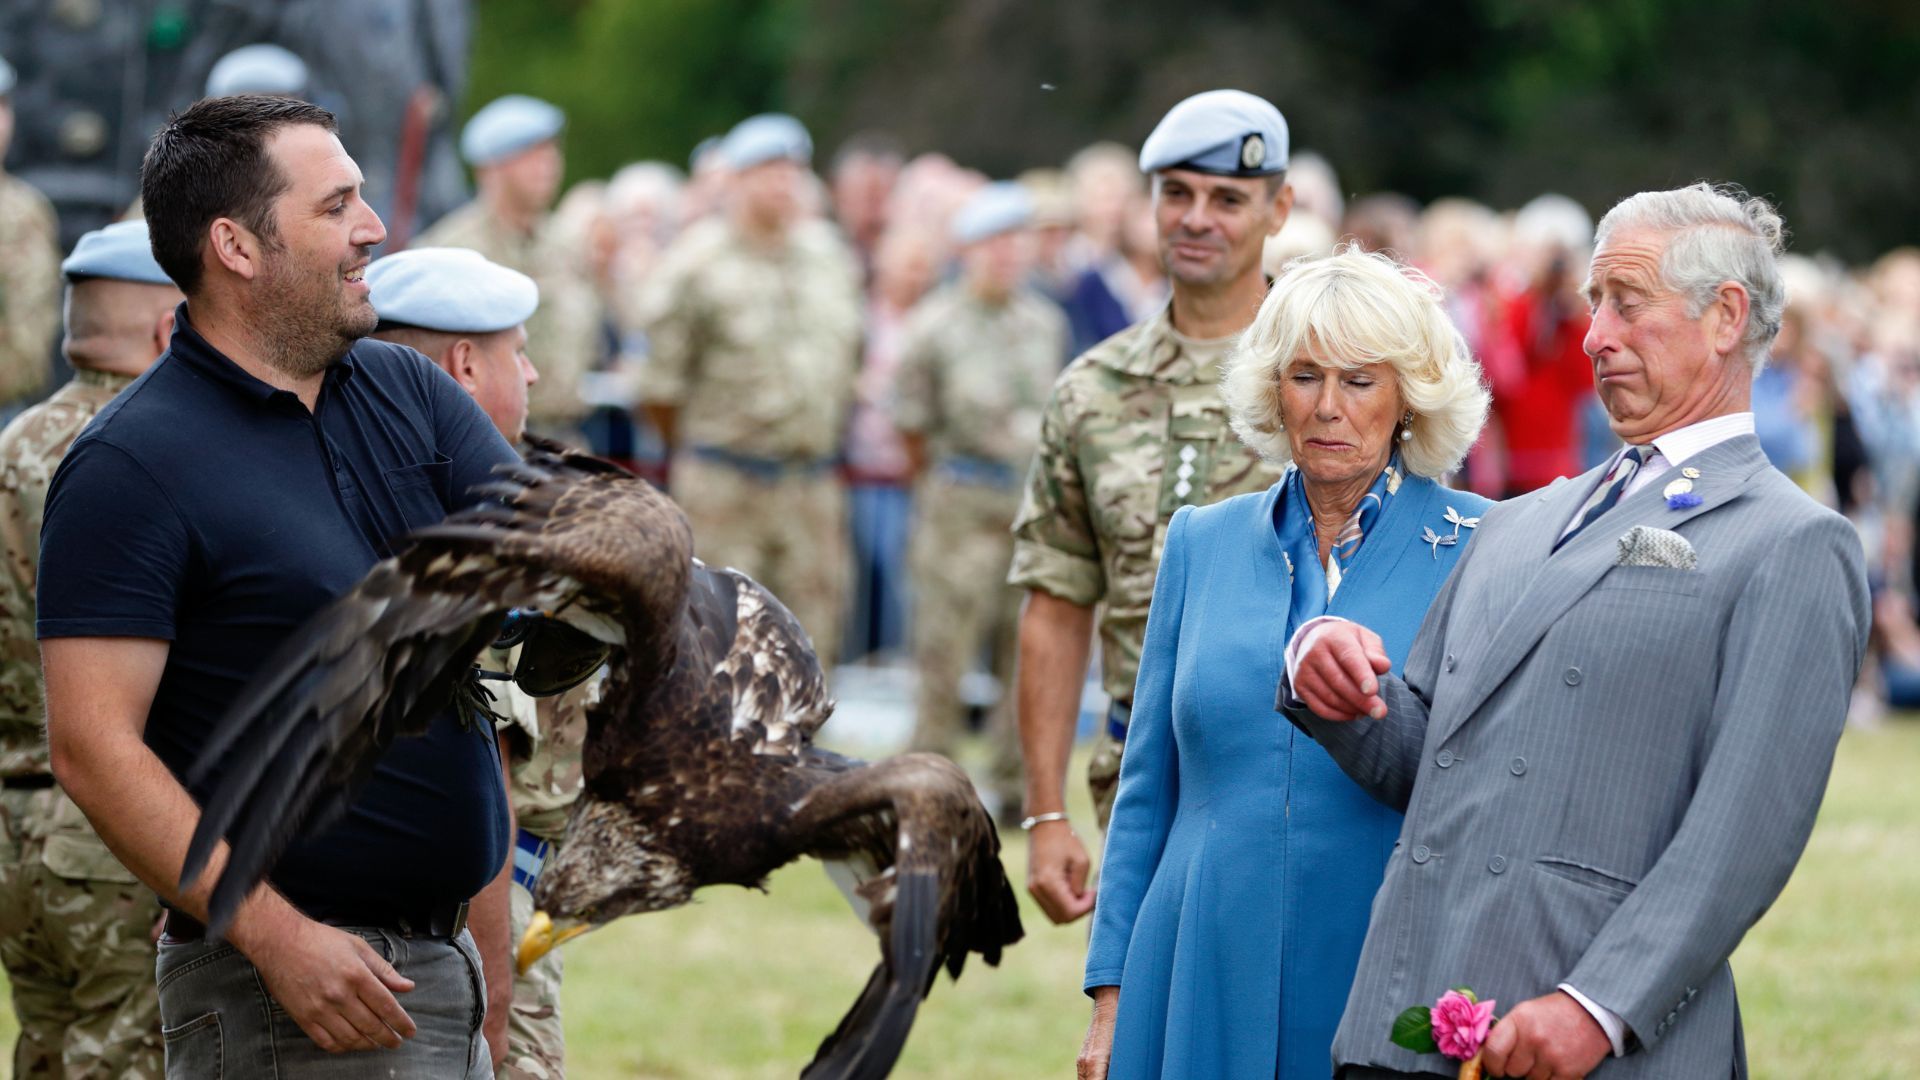 <p>                     We often see the royals showcase their sense of humour, and this rather silly incident with King Charles and an eagle is certainly one of those times. At the 2013 Sandringham Flower Show, the then-Prince held a 10lb eagle, which gave him quite the start when the bird of prey spread its wings to balance itself. As you can see from the photograph, Camilla got quite the shock too!                   </p>